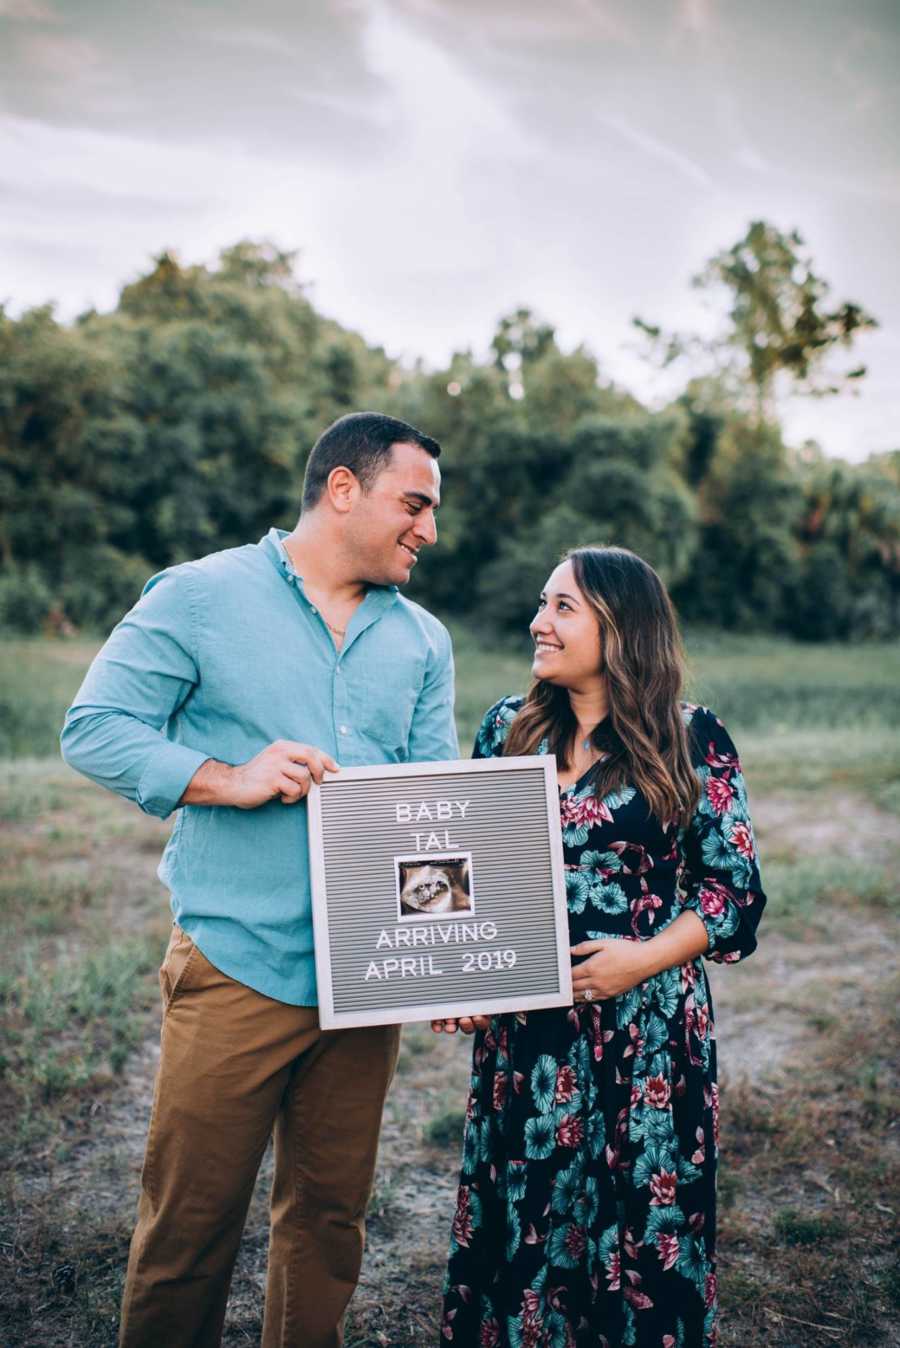 Husband and wife stand smiling at each other while holding sign that says, "Baby Tal"